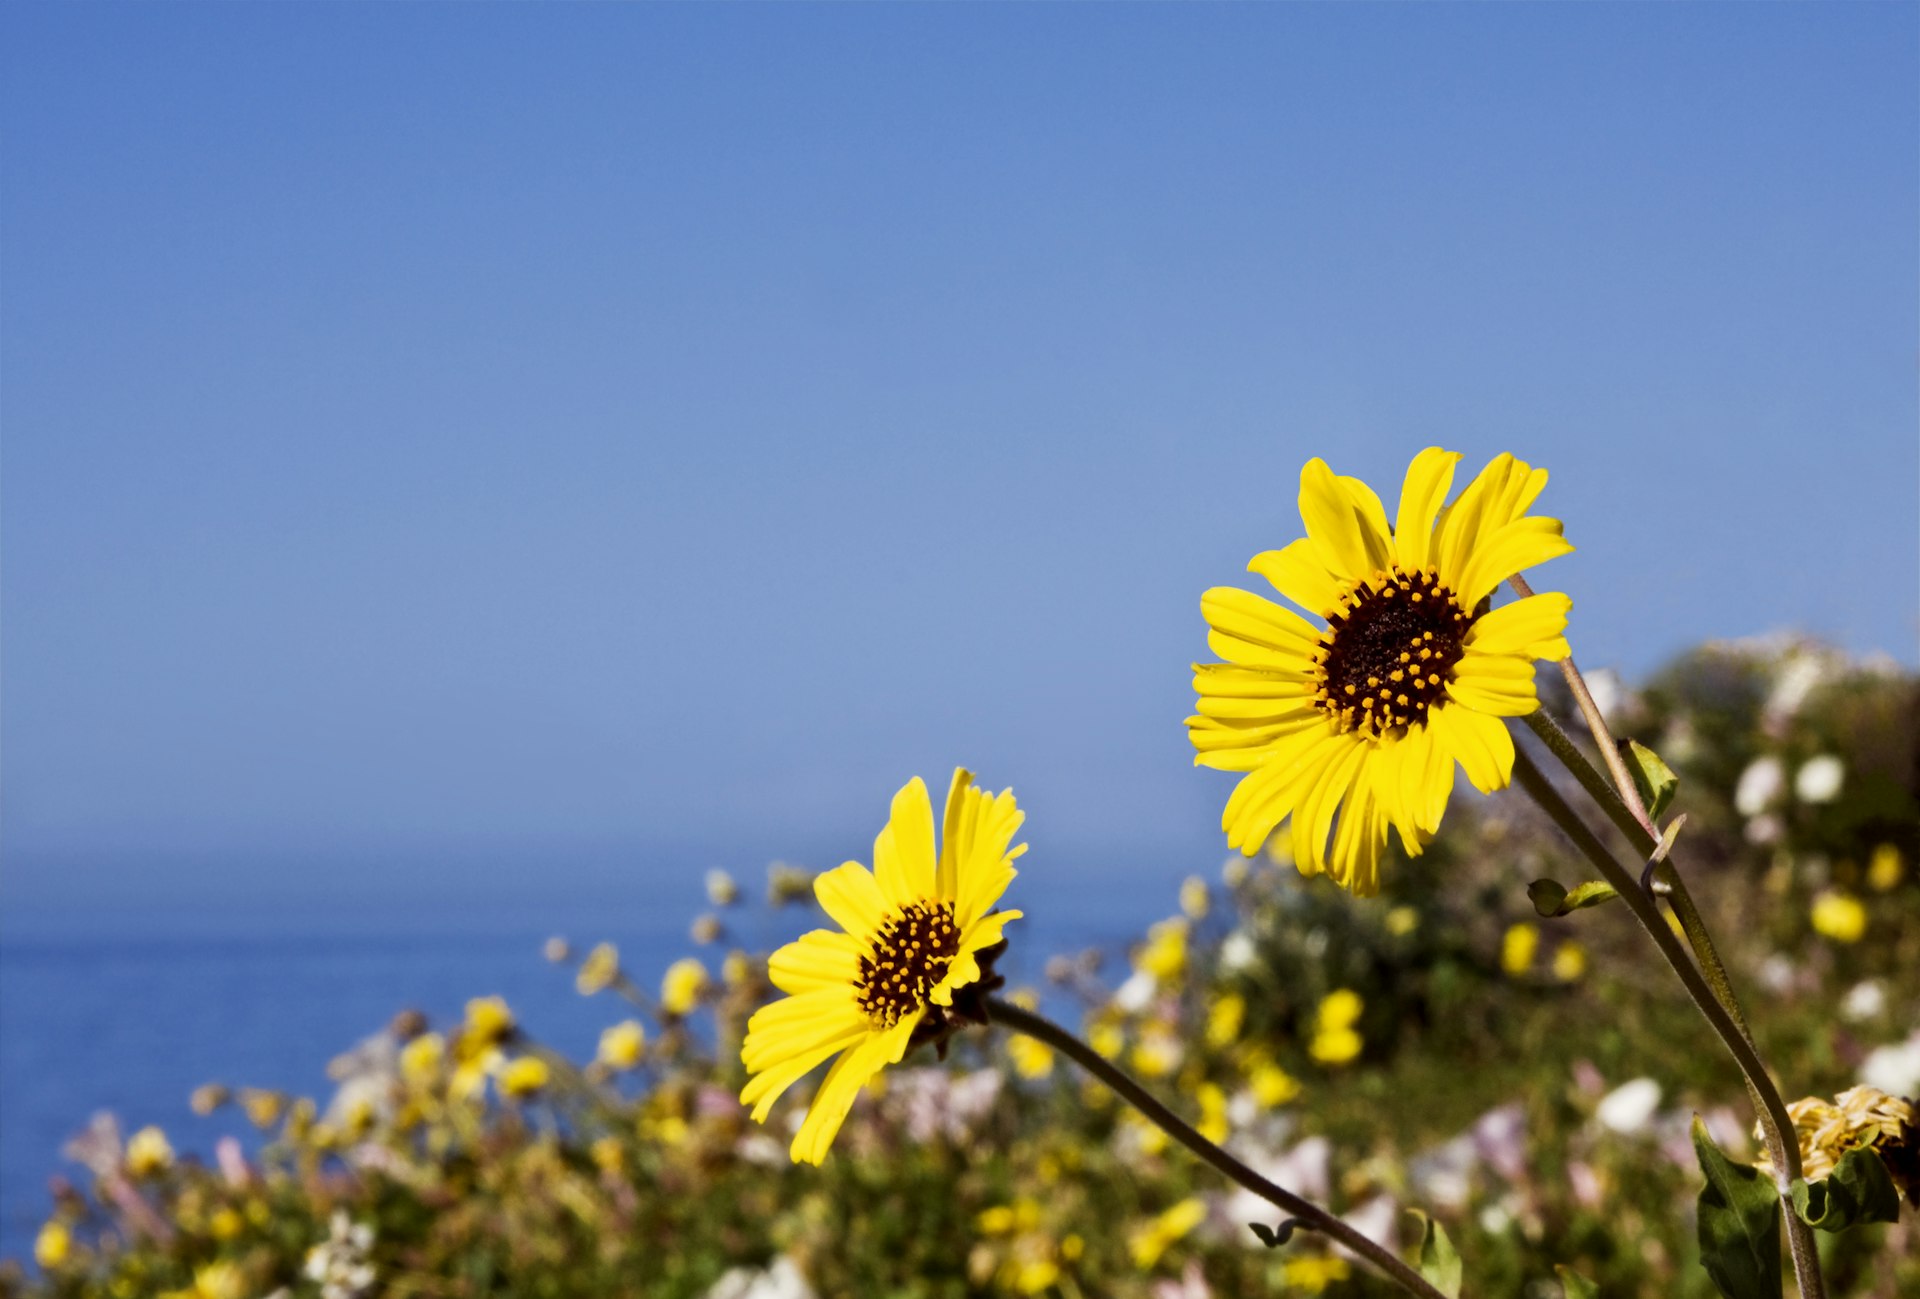 Bright yellow wildflowers in bloom on grassland at the top of a cliff with the sea in the distance